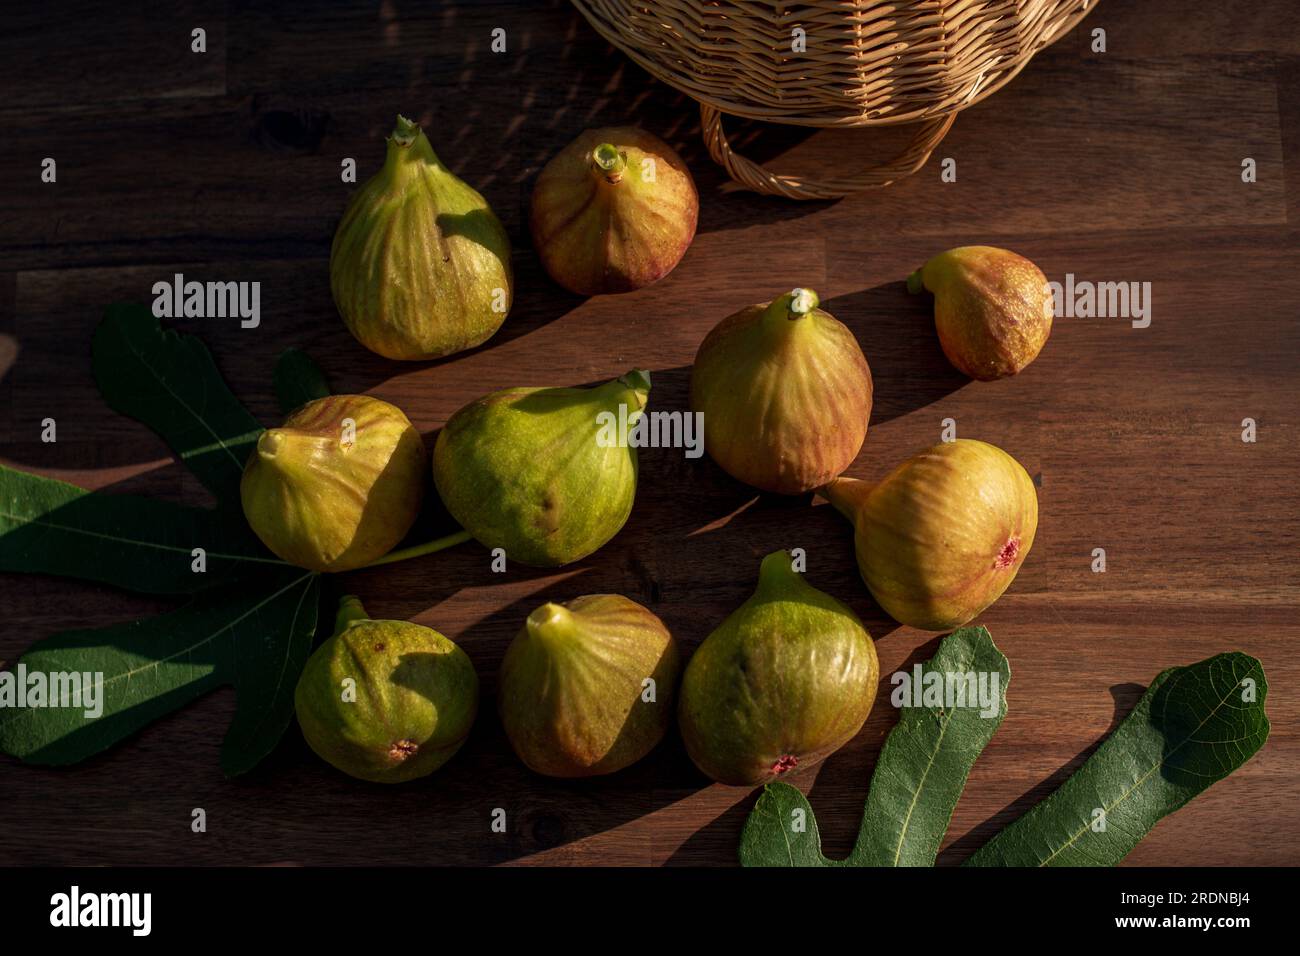 A few yellow figs on an brown wooden background. Stock Photo